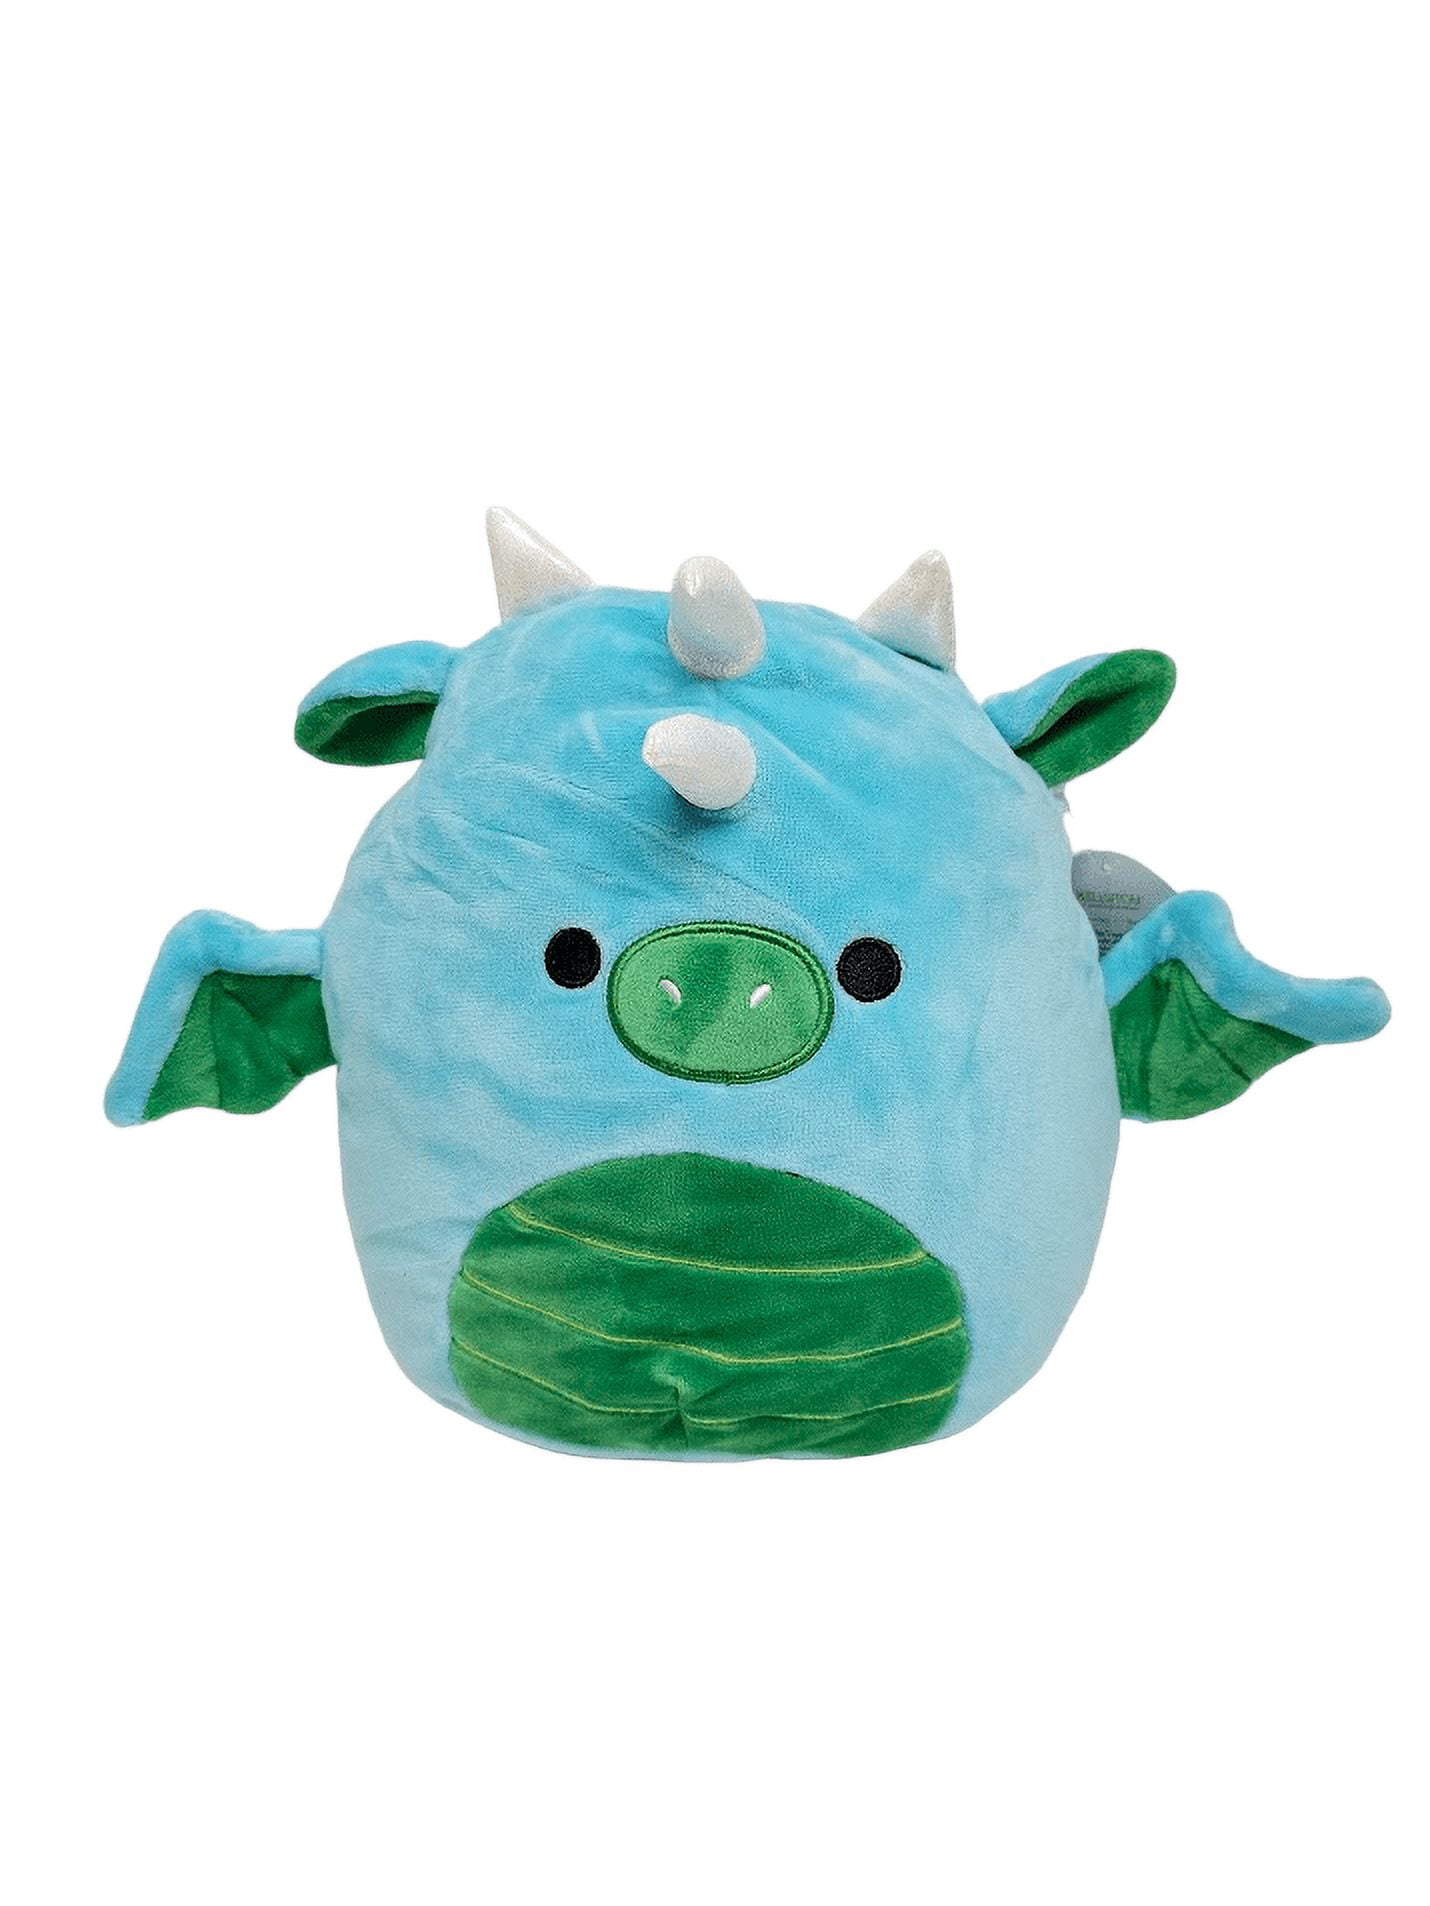 Squishmallows Official Kellytoys Plush 8 Inch Dalton the Green and Blue  Dragon Ultimate Soft Plush Stuffed Toy 